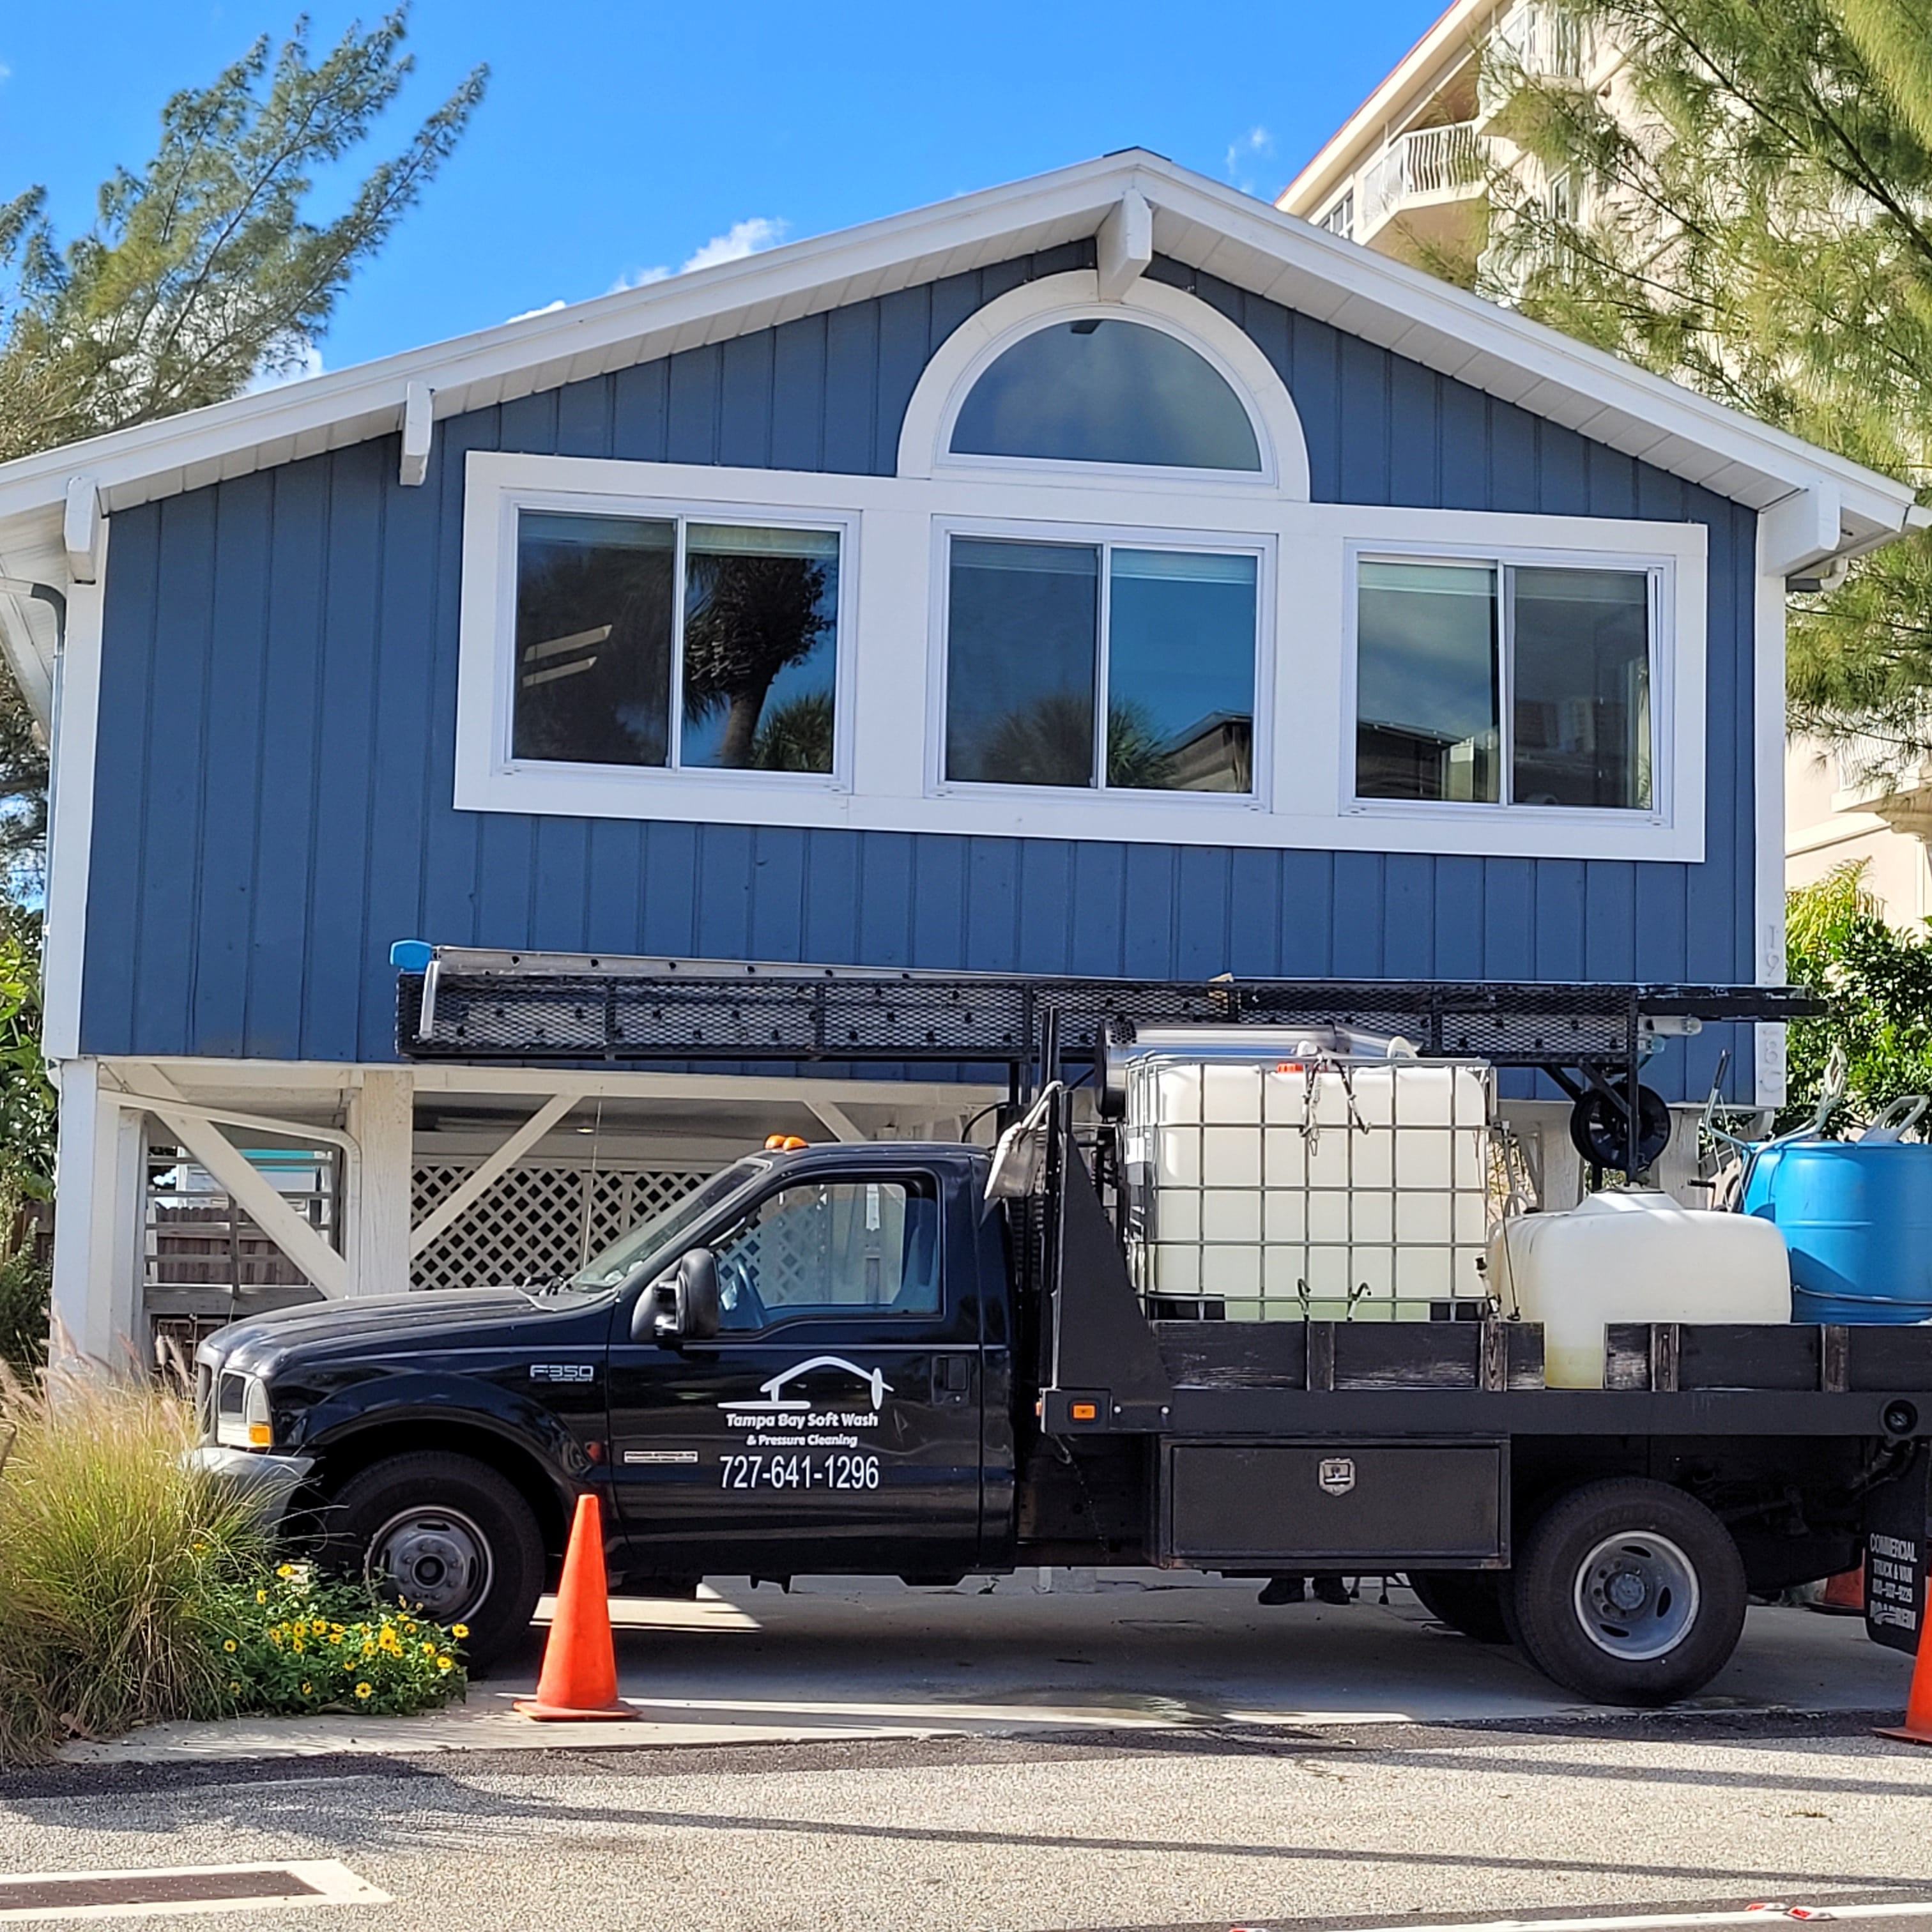 Tampa Bay Soft Wash & Pressure Cleaning Services (Redington Shores, FL)